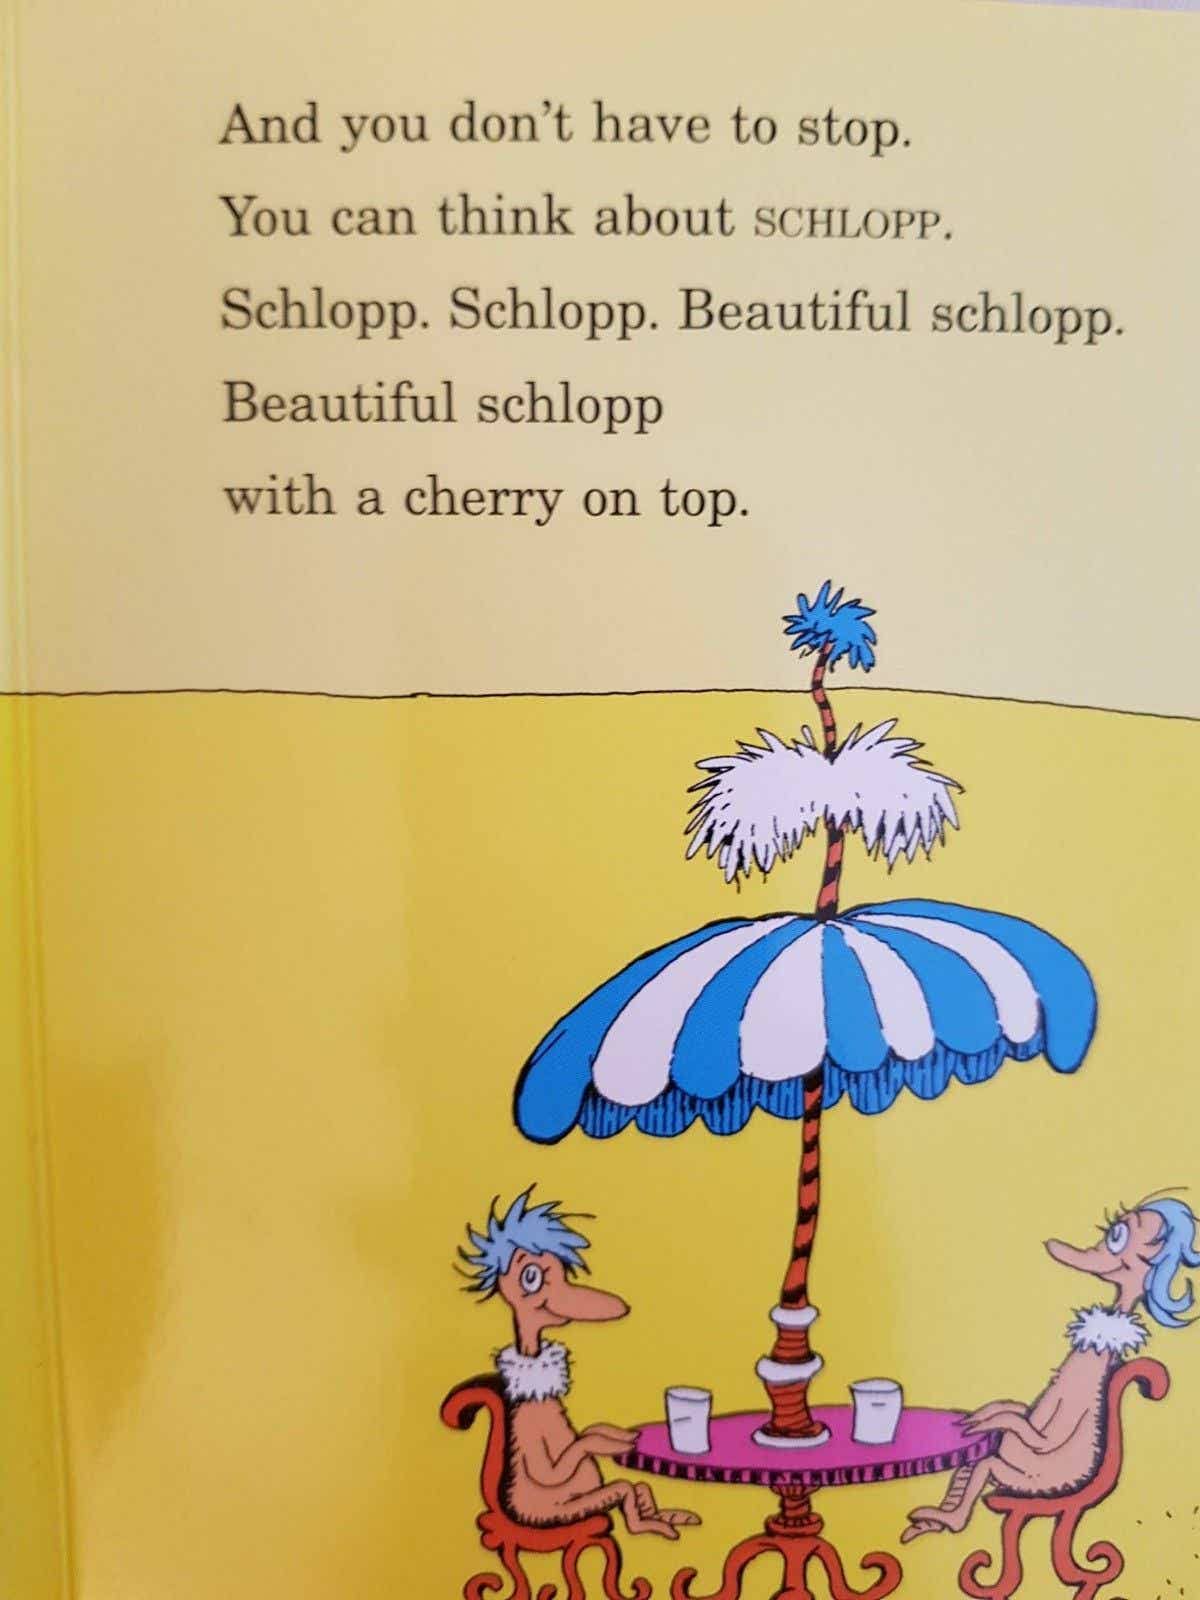 oh, the Thinks you can Think Like New DR. Seuss  (4619394678839)